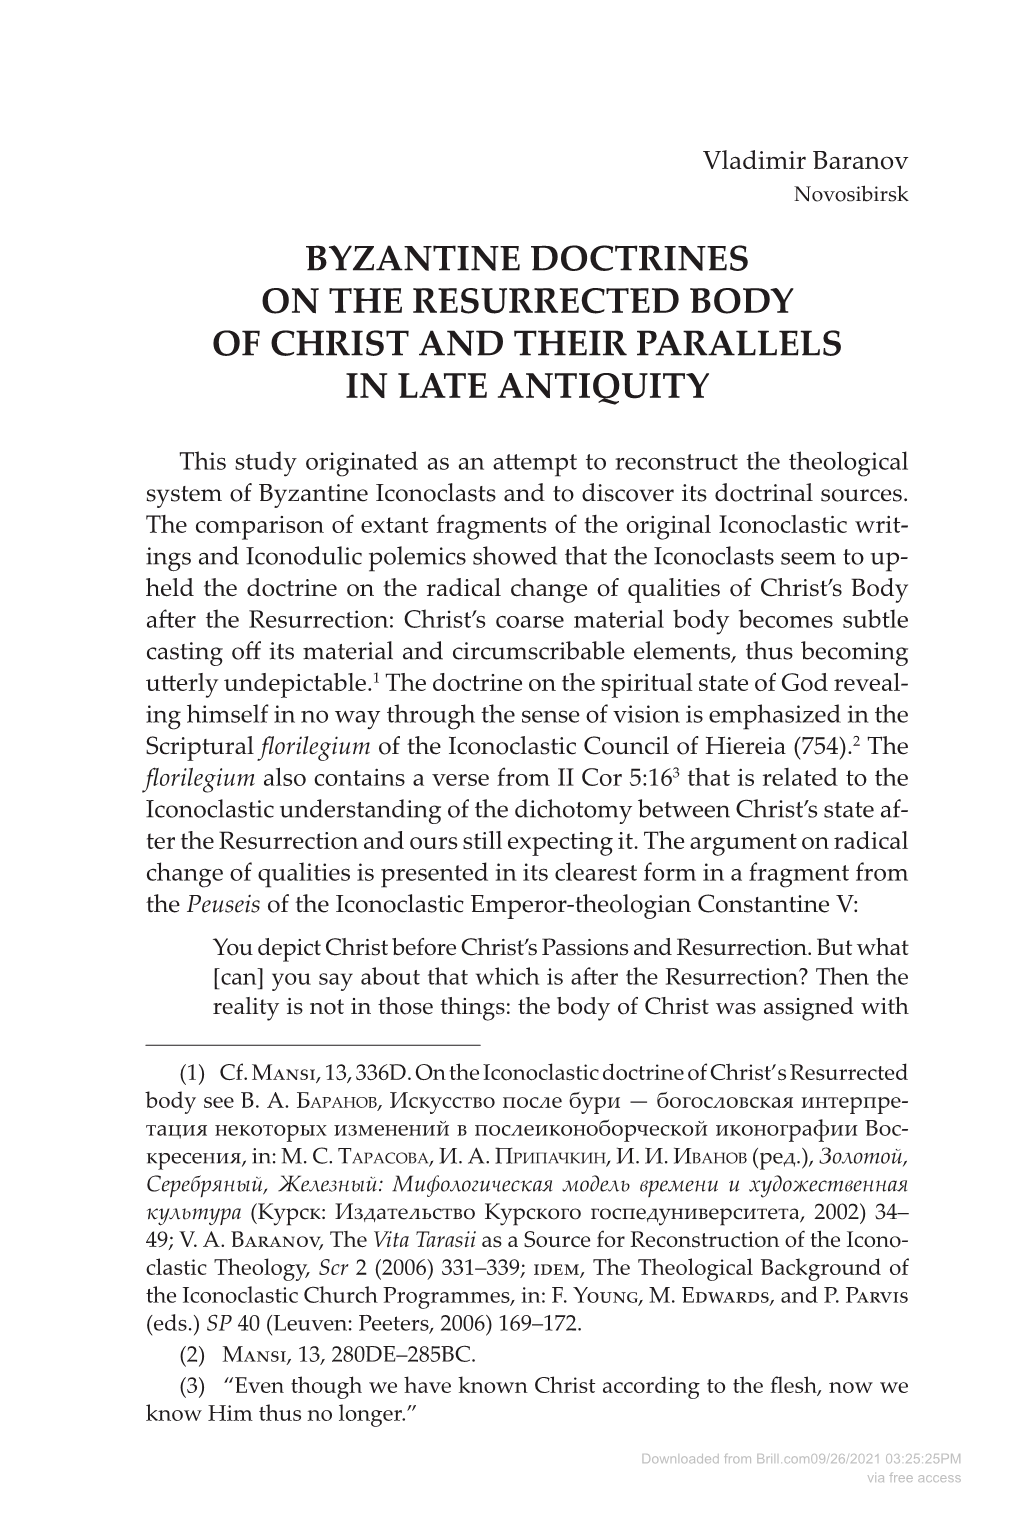 Byzantine Doctrines on the Resurrected Body of Christ and Their Parallels in Late Antiquity